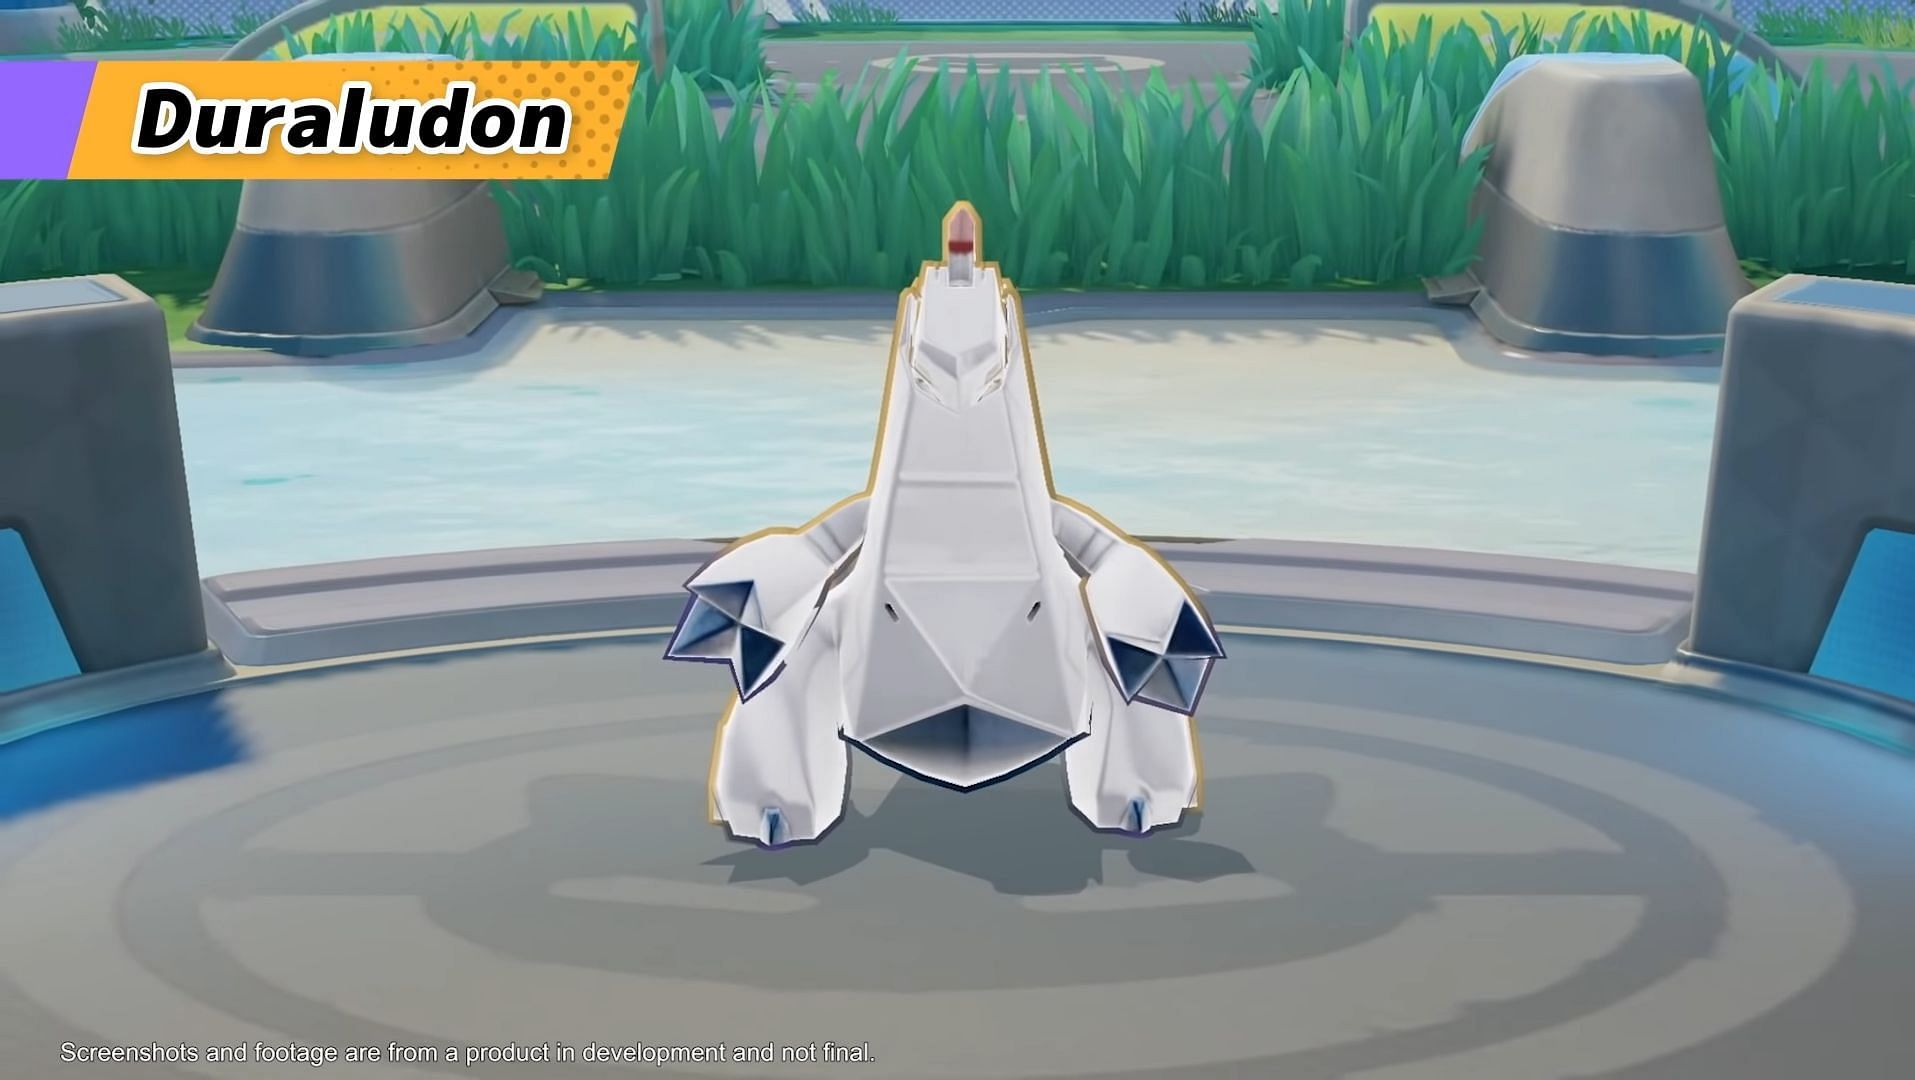 Duraludon will be a new Attacker in the game (Image vie TiMi Studios)